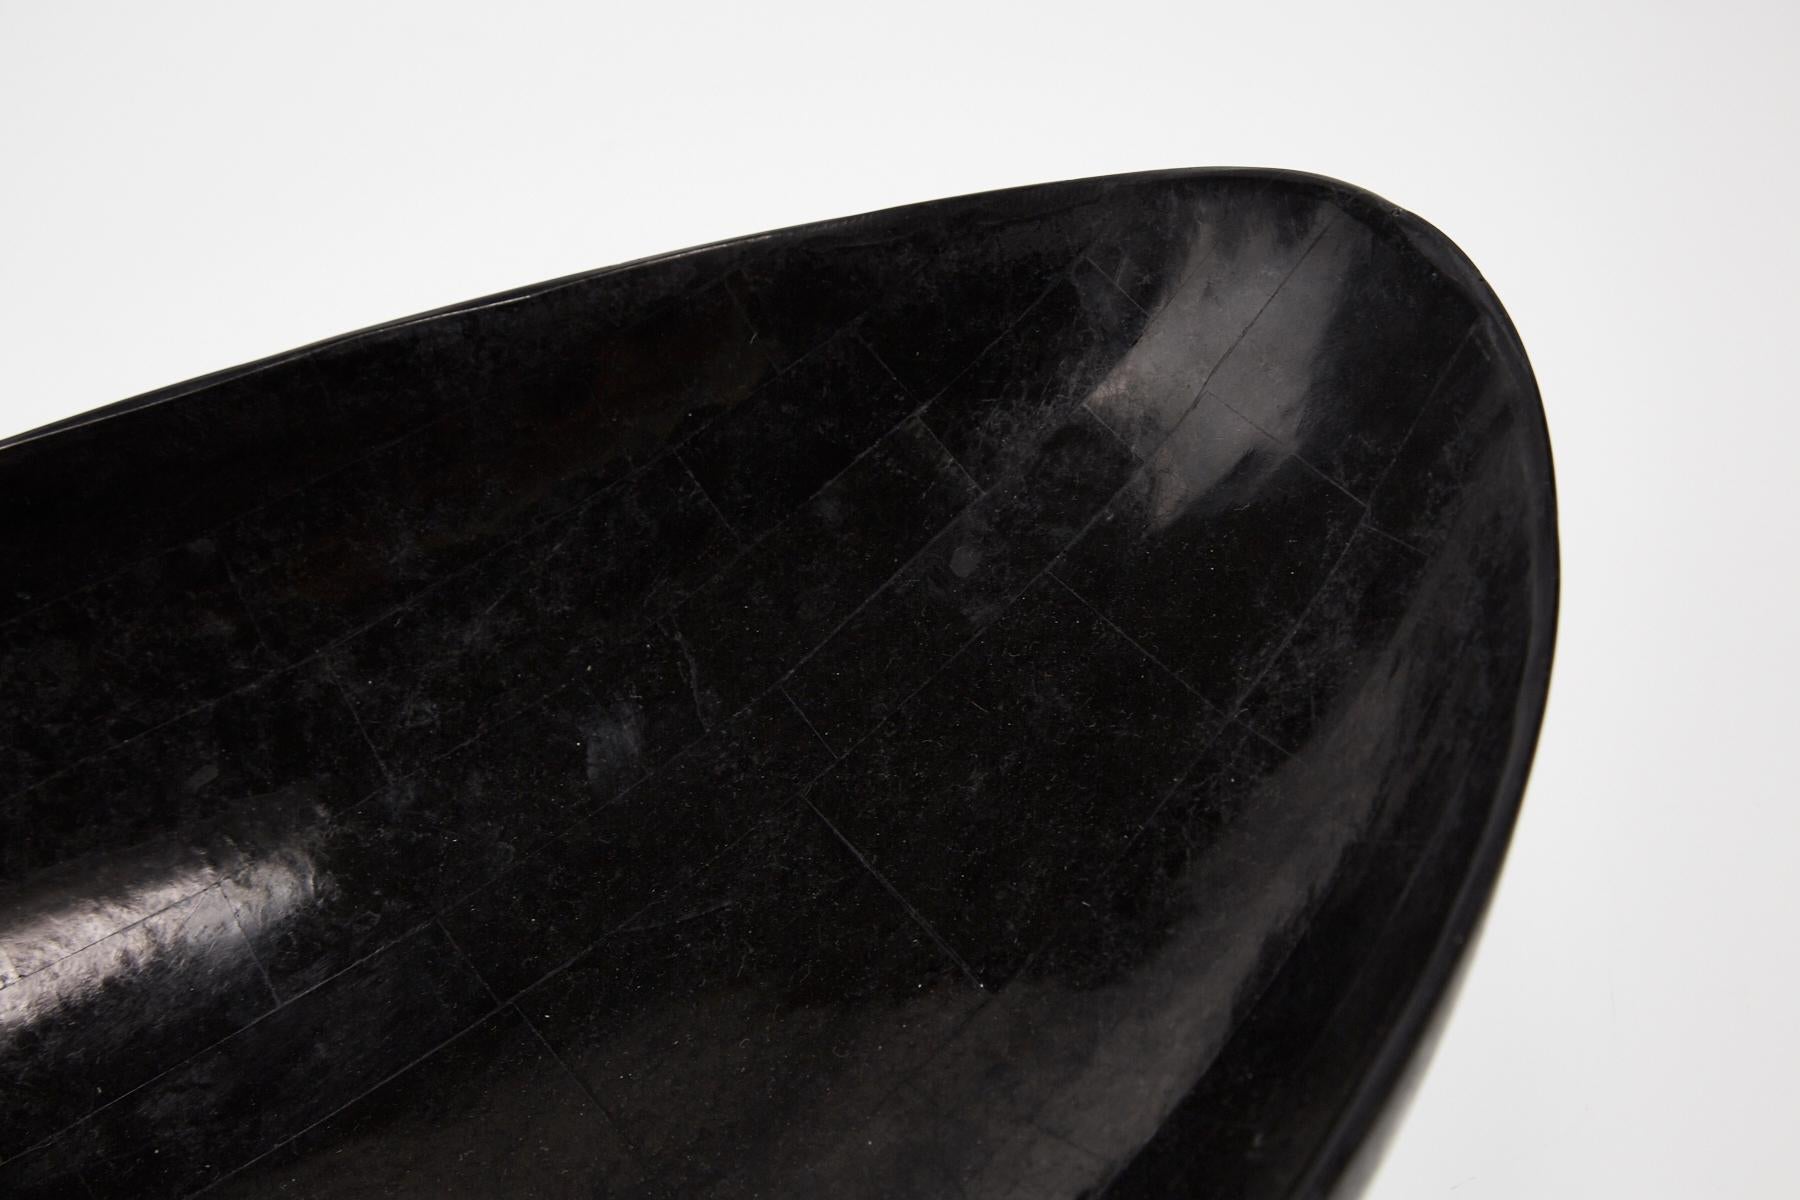 Postmodern Black Tessellated Stone Oval Decorative Bowl or Platter, 1990s For Sale 3